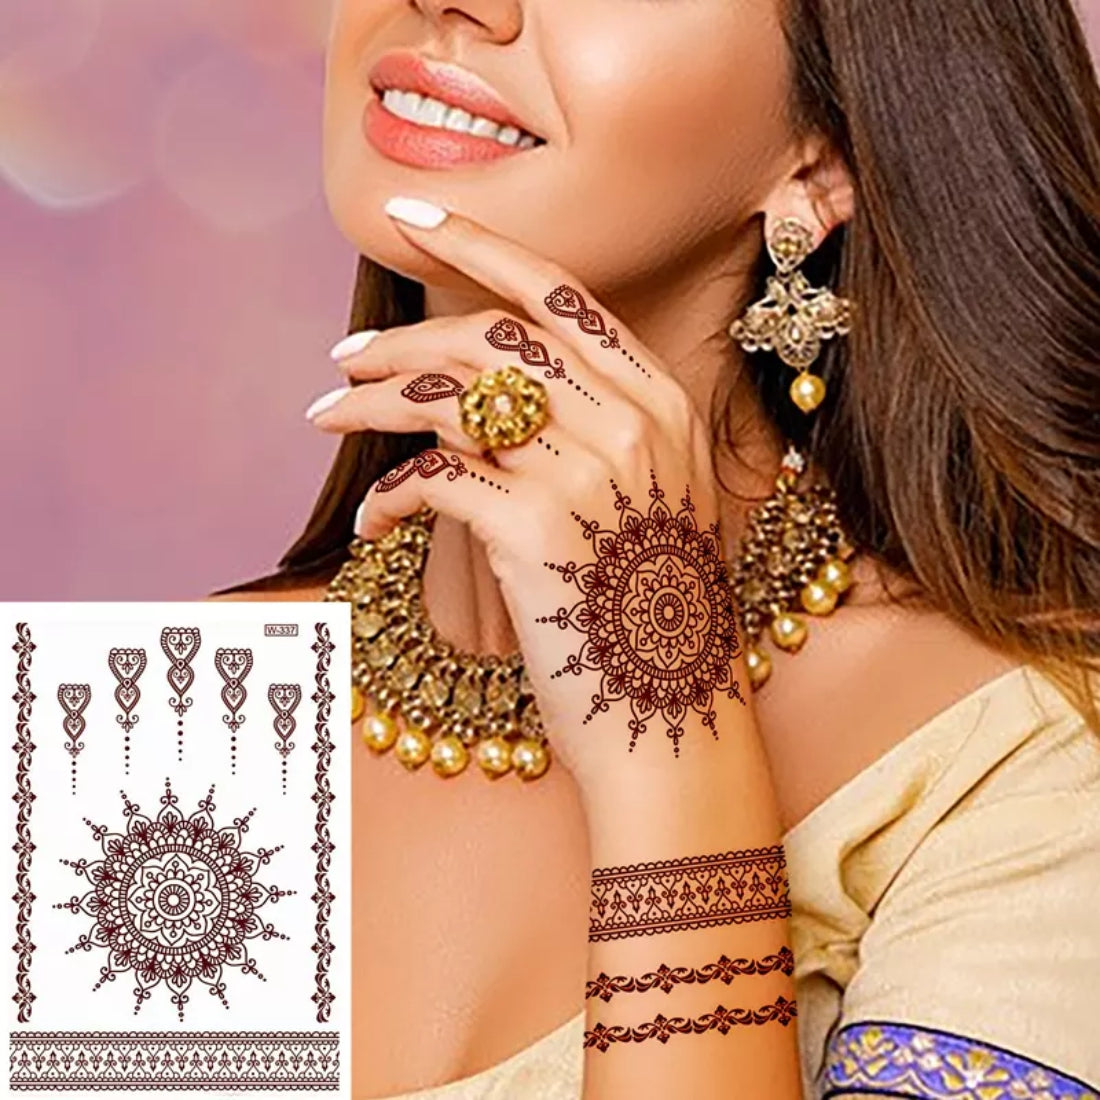 Buy HOWAF Pack of 12 Sheets Henna Tattoo StencilTemplates Temporary Tattoo  Henna Kit Temporary Glitter Airbrush Tattoo Stencils Indian Arabian Self  Adhesive Tattoo Sticker for Hand Body Paint Online at Lowest Price